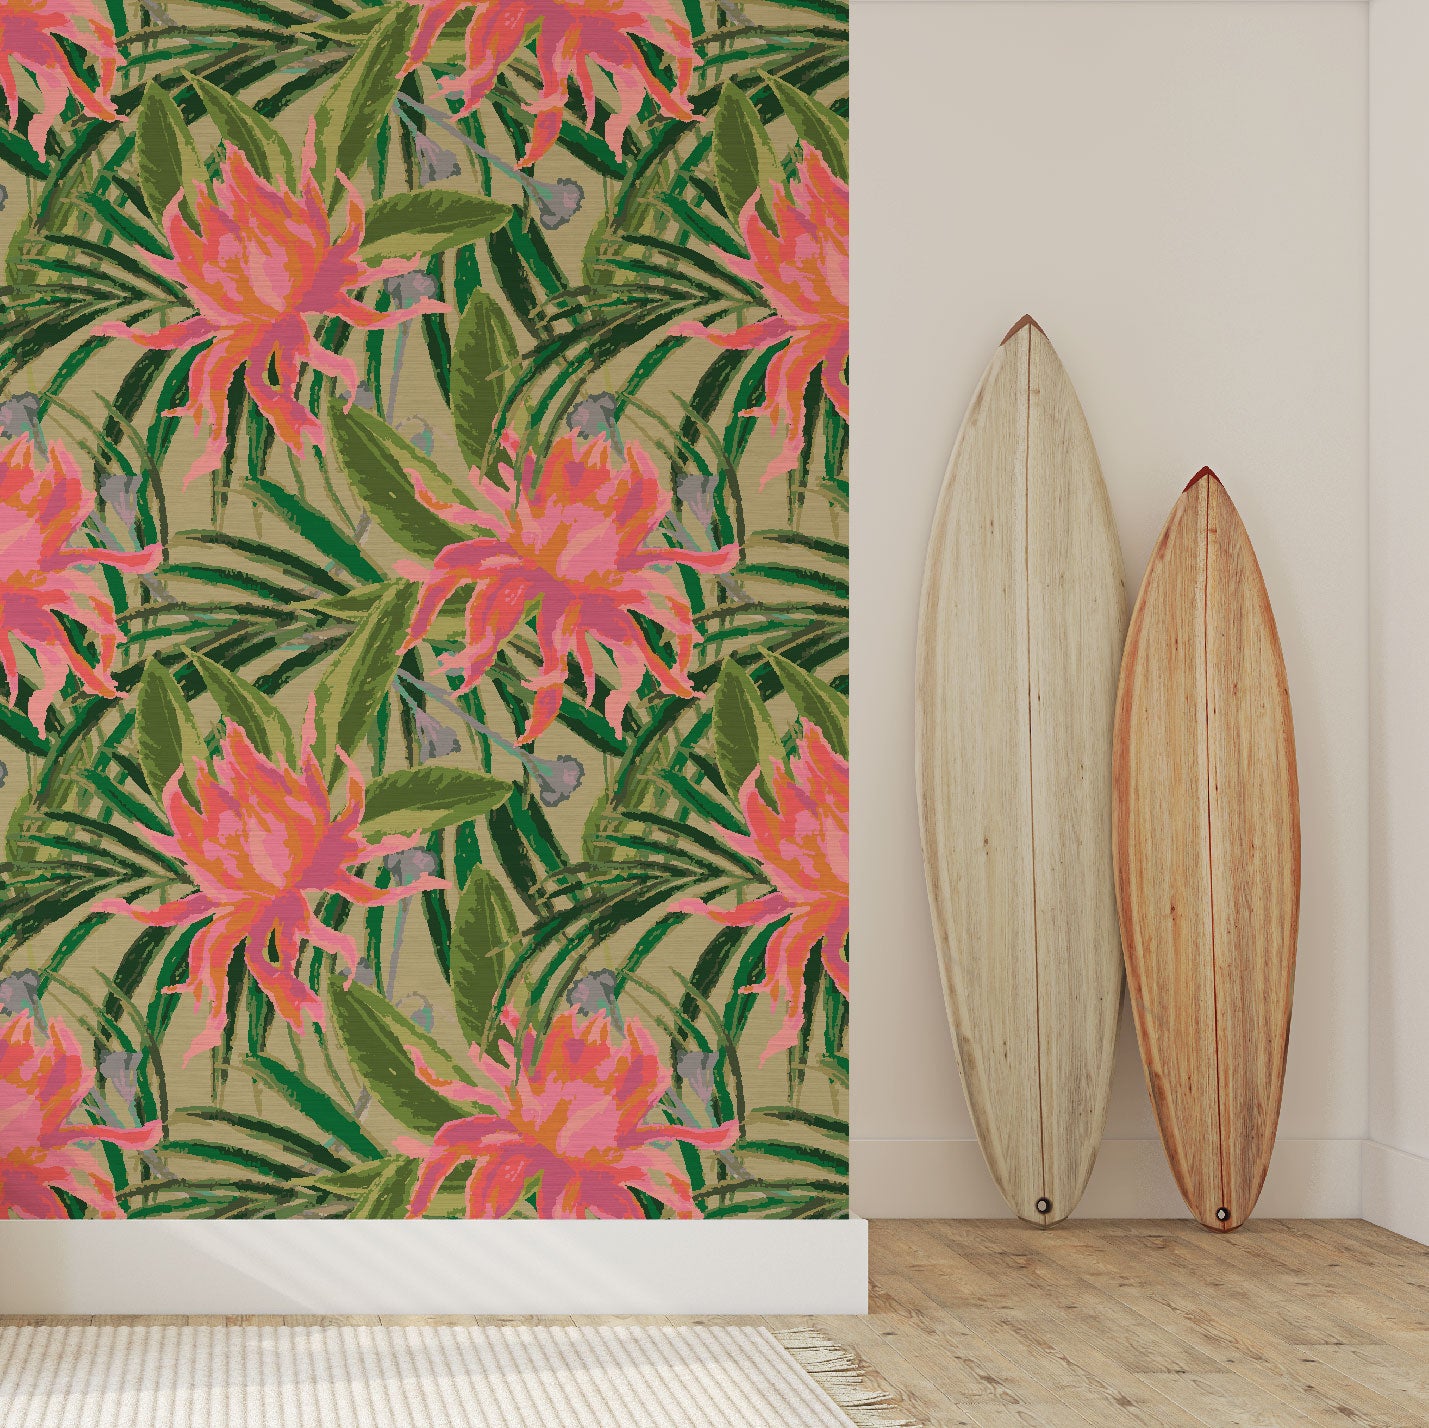 grasscloth wallpaper with olive green based featuring oversized painterly tropical flowers and palm leafs in striking shades of pink, orange and lavender and leafs in shades of deep green Natural Textured Eco-Friendly Non-toxic High-quality Sustainable Interior Design Bold Custom Tailor-made Retro chic Tropical Jungle Coastal preppy Garden Seaside Coastal Seashore Waterfront Vacation home styling Retreat Relaxed beach vibes Beach cottage Shoreline Oceanfront botanical palm leaf surf foyer entrance surf